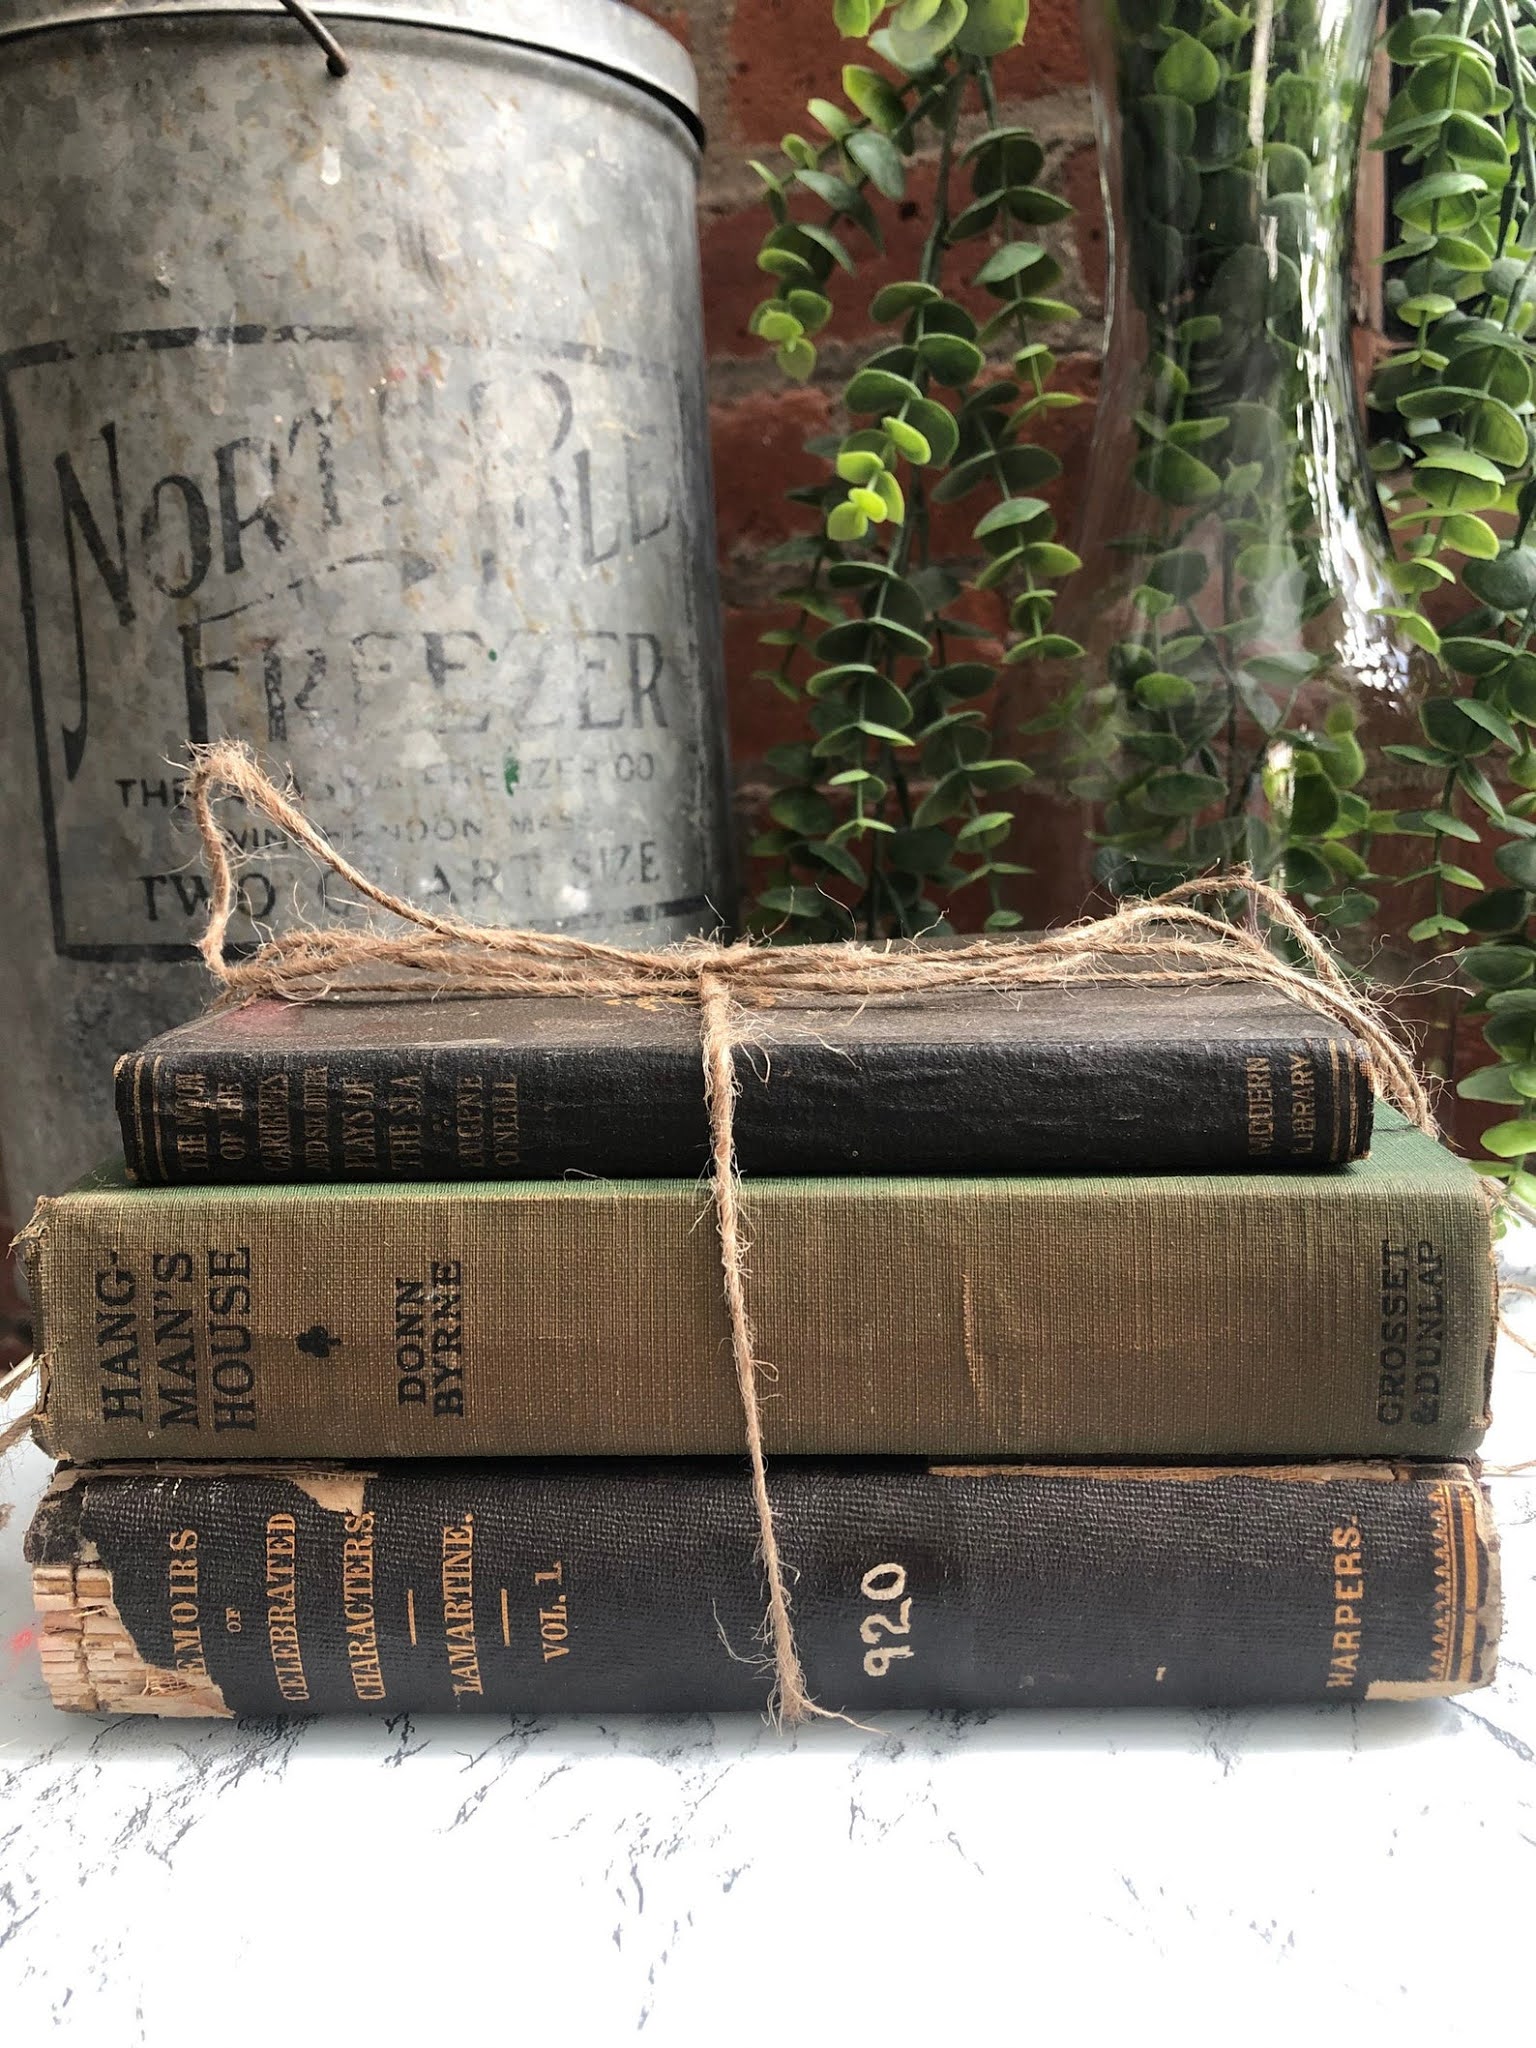 A stack of three antique books tied with string